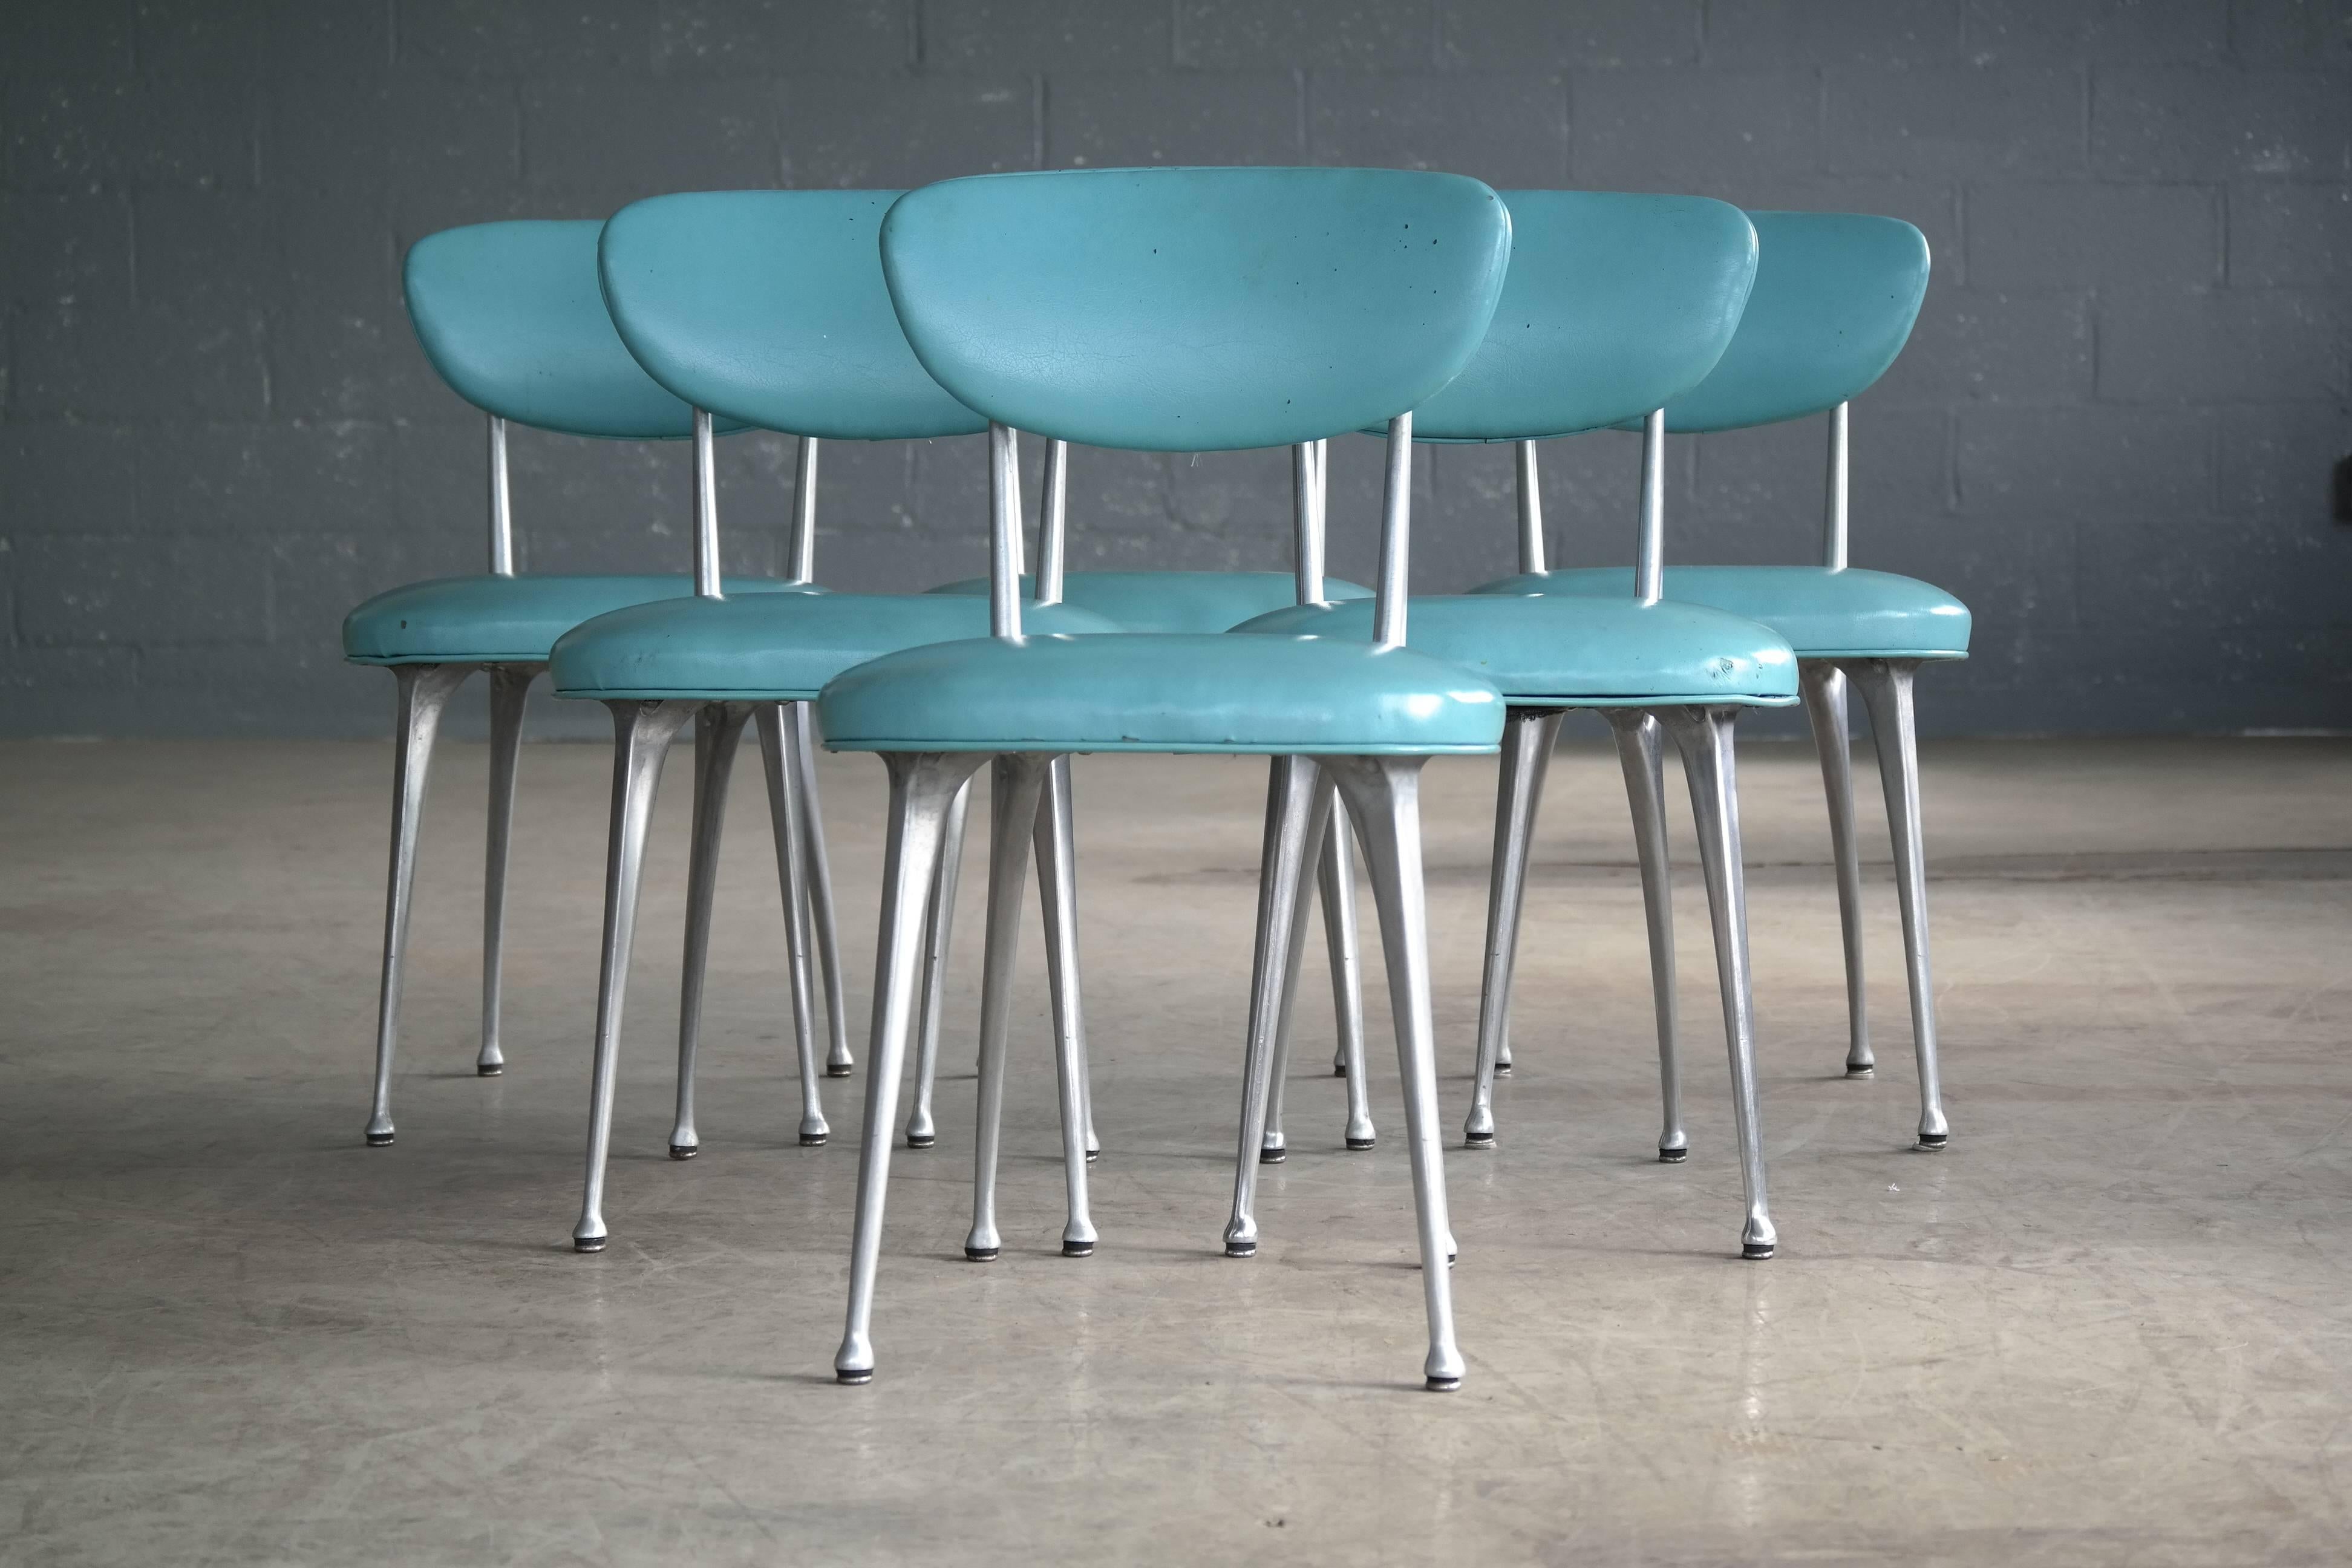 Striking classic modern and increasingly sought Gazelle dining chairs made by Shelby Williams in the 1950s. Perfect for turning your dining area or kitchen into your own private midcentury diner. The aluminum bases are in excellent condition while